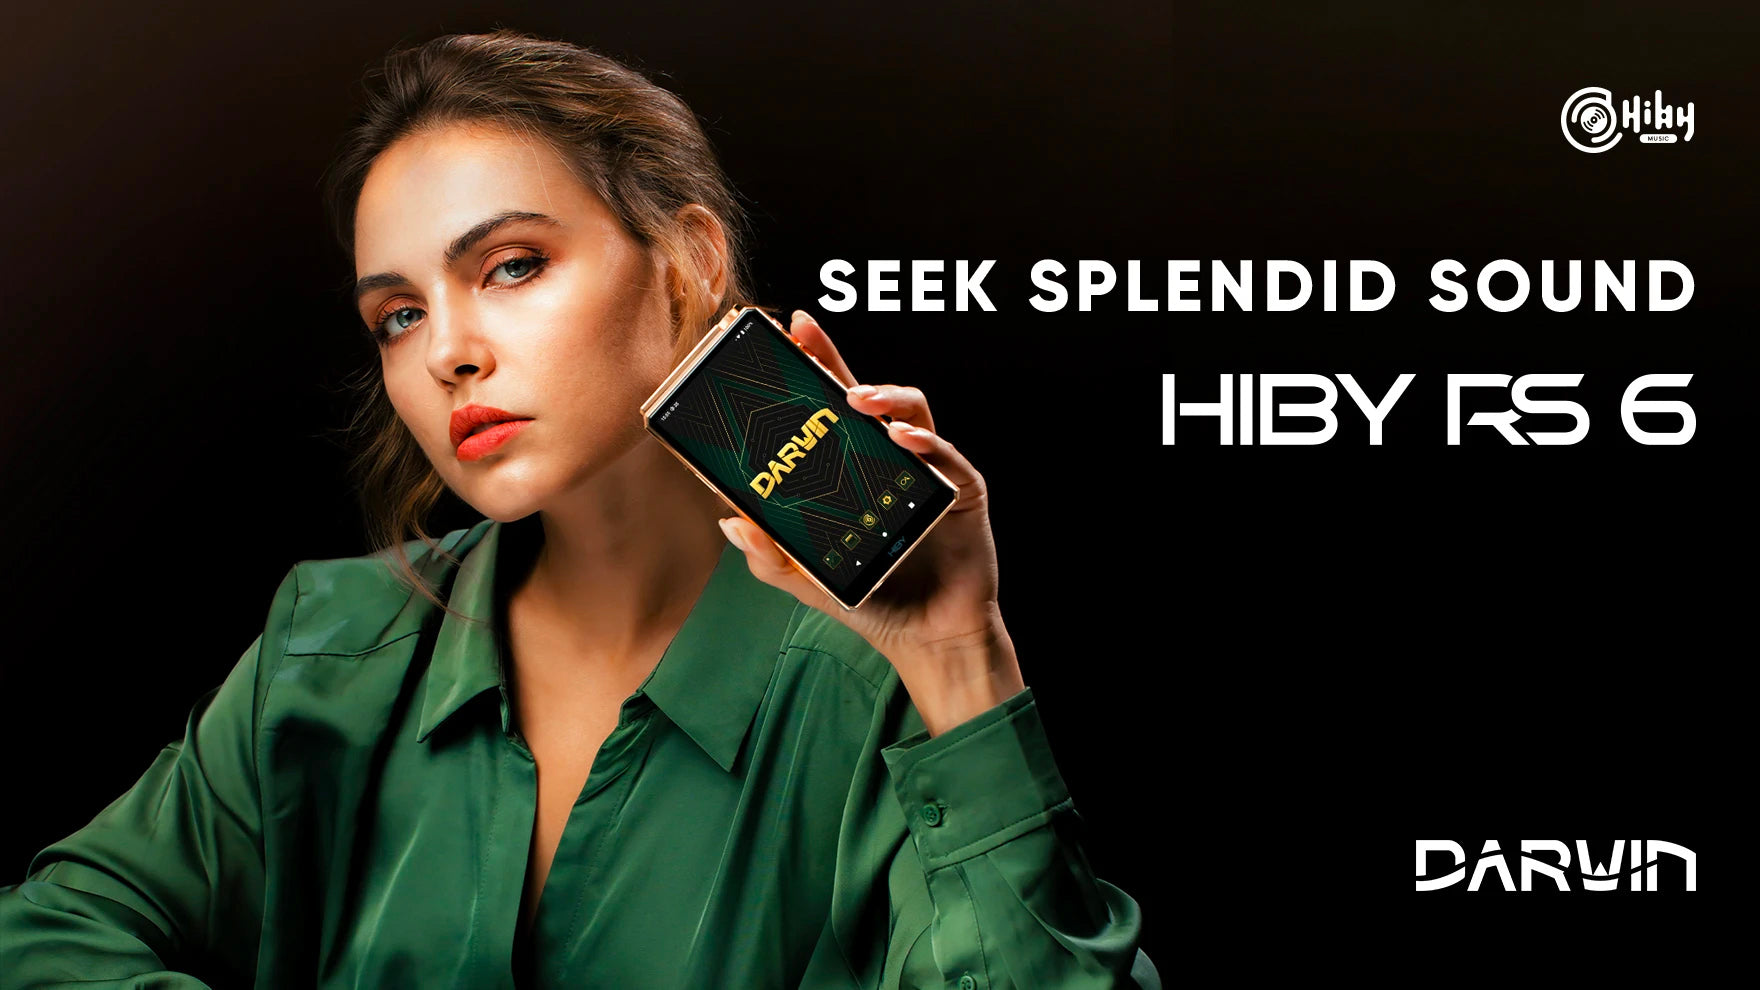 HiBy RS6 Latest Hi-Res Music Player With R-2R DAC Architecture